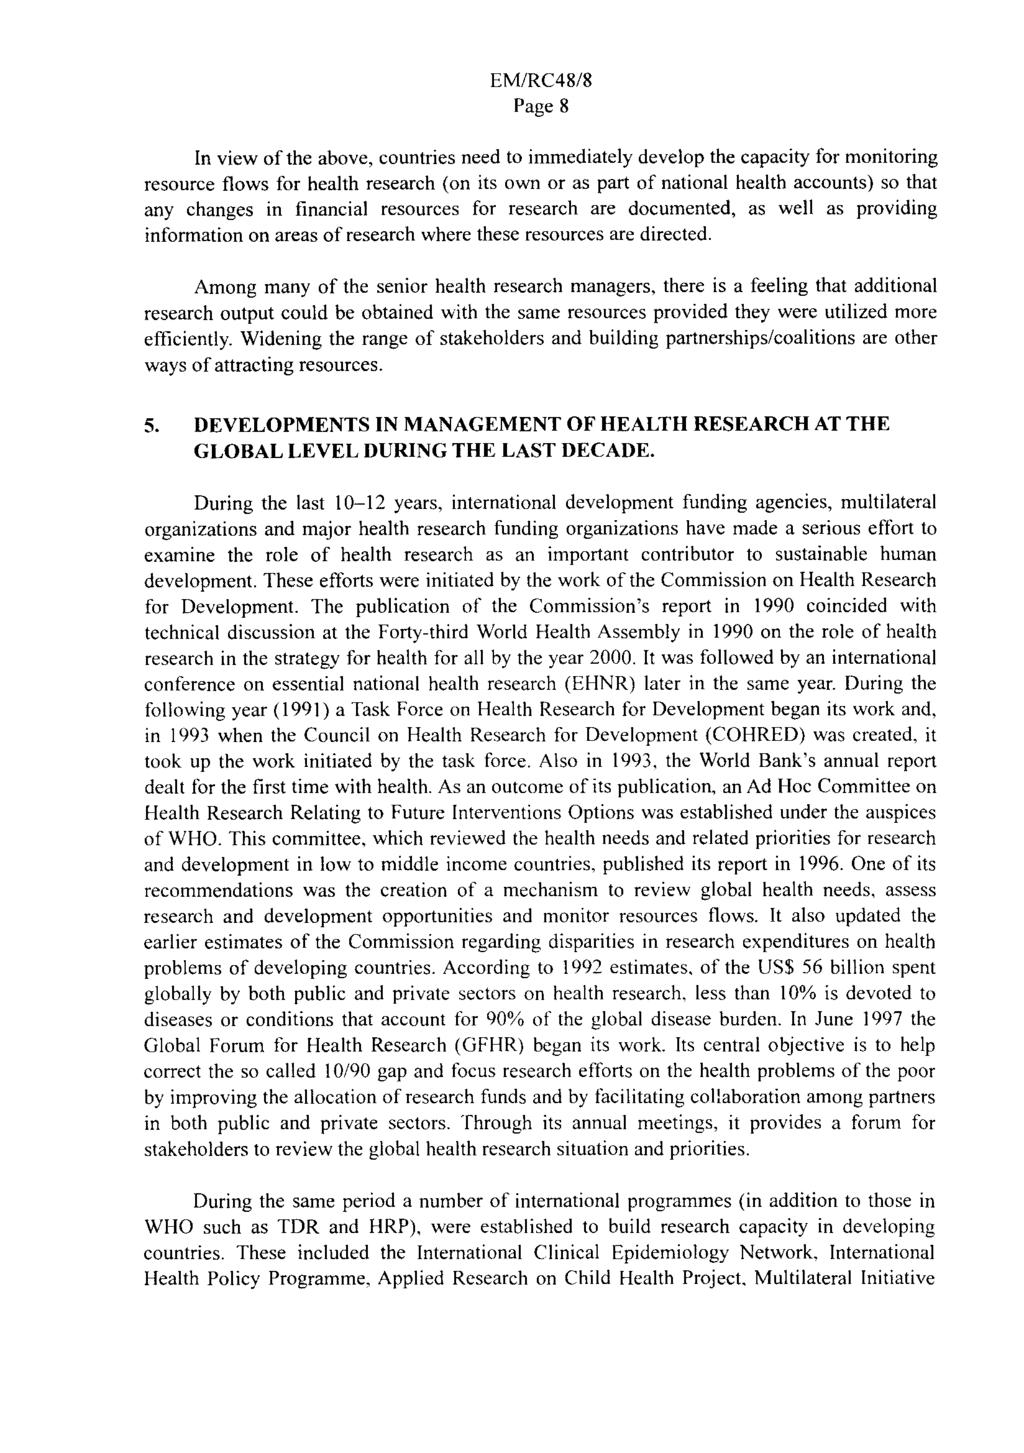 Page 8 In view of the above, countries need to immediately develop the capacity for monitoring resource flows for health research (on its own or as part of national health accounts) so that any